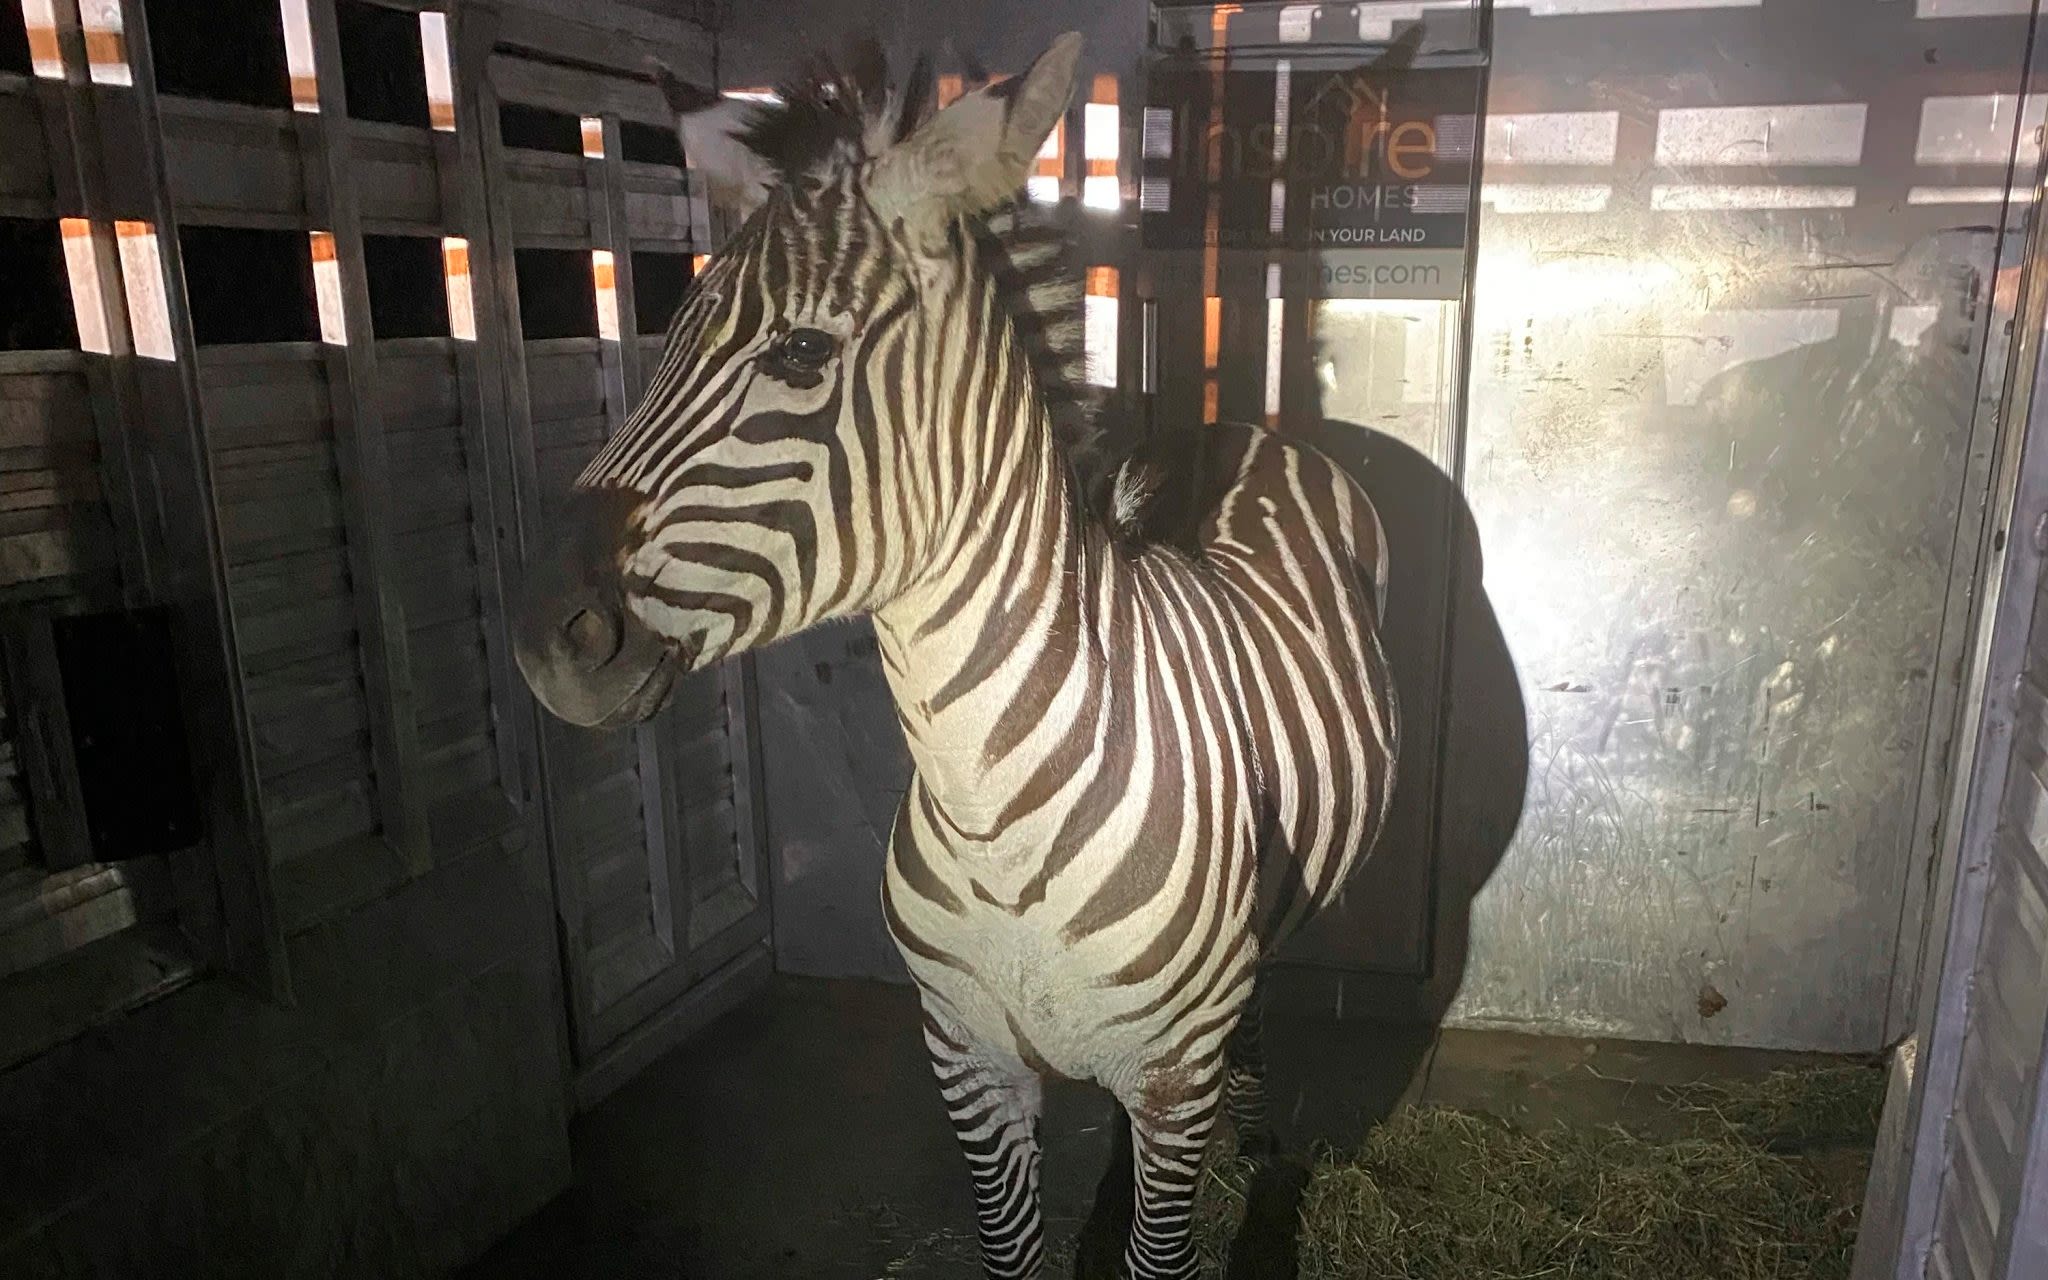 Escaped zebra captured by rodeo clown with white bread